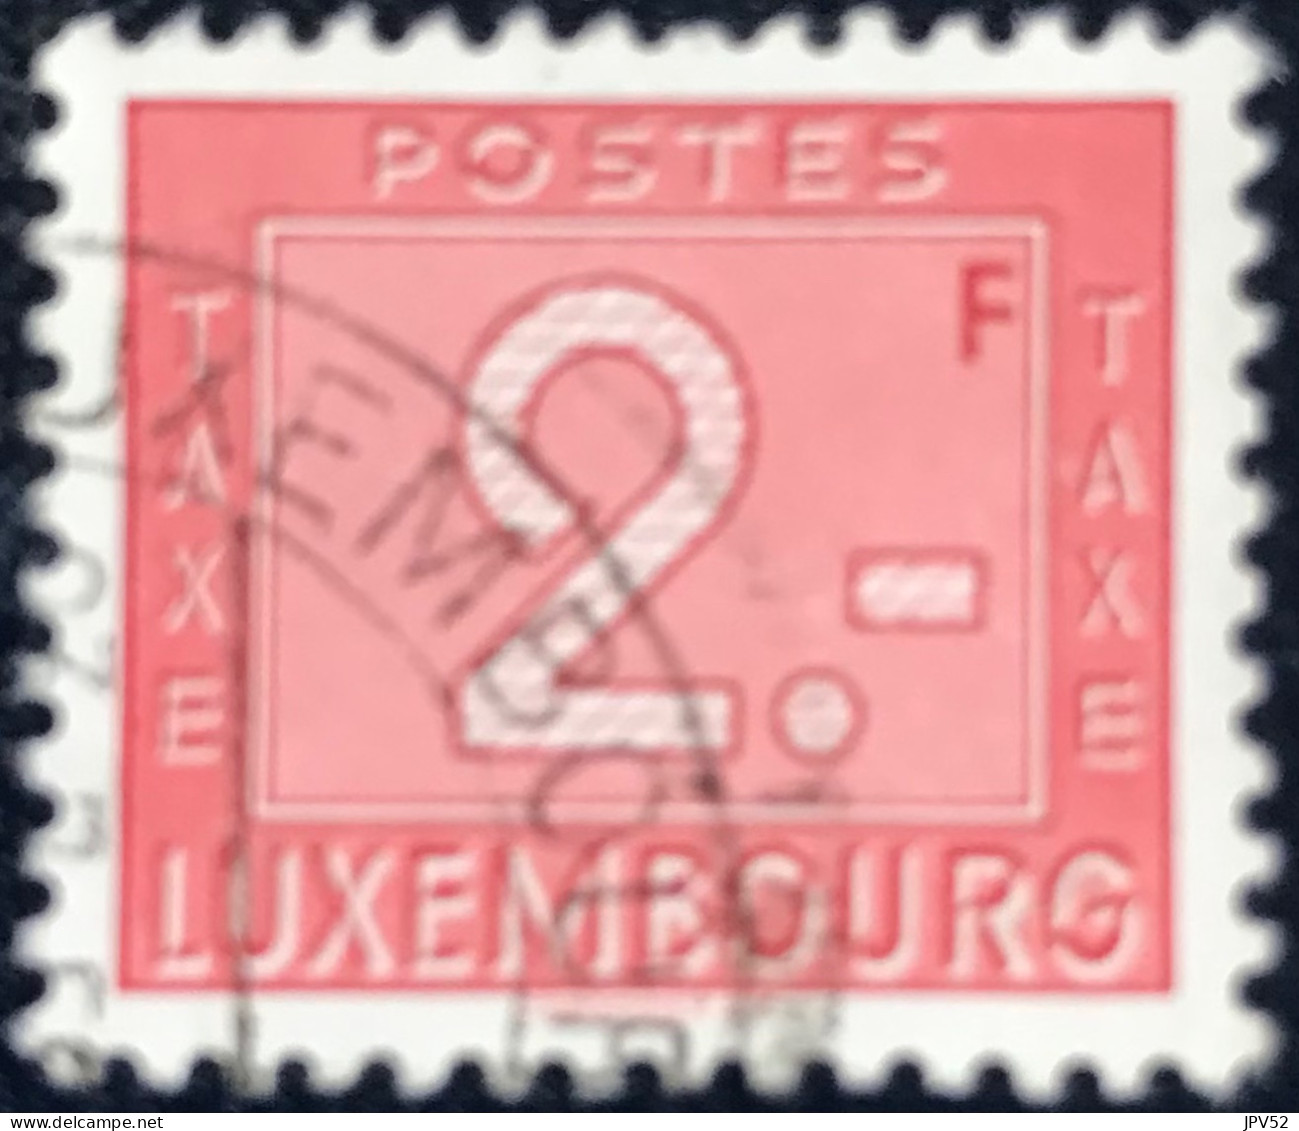 Luxembourg - Luxemburg - C18/33 - 1946 - (°)used - Michel 32 - Strafport - Cijfer - Taxes